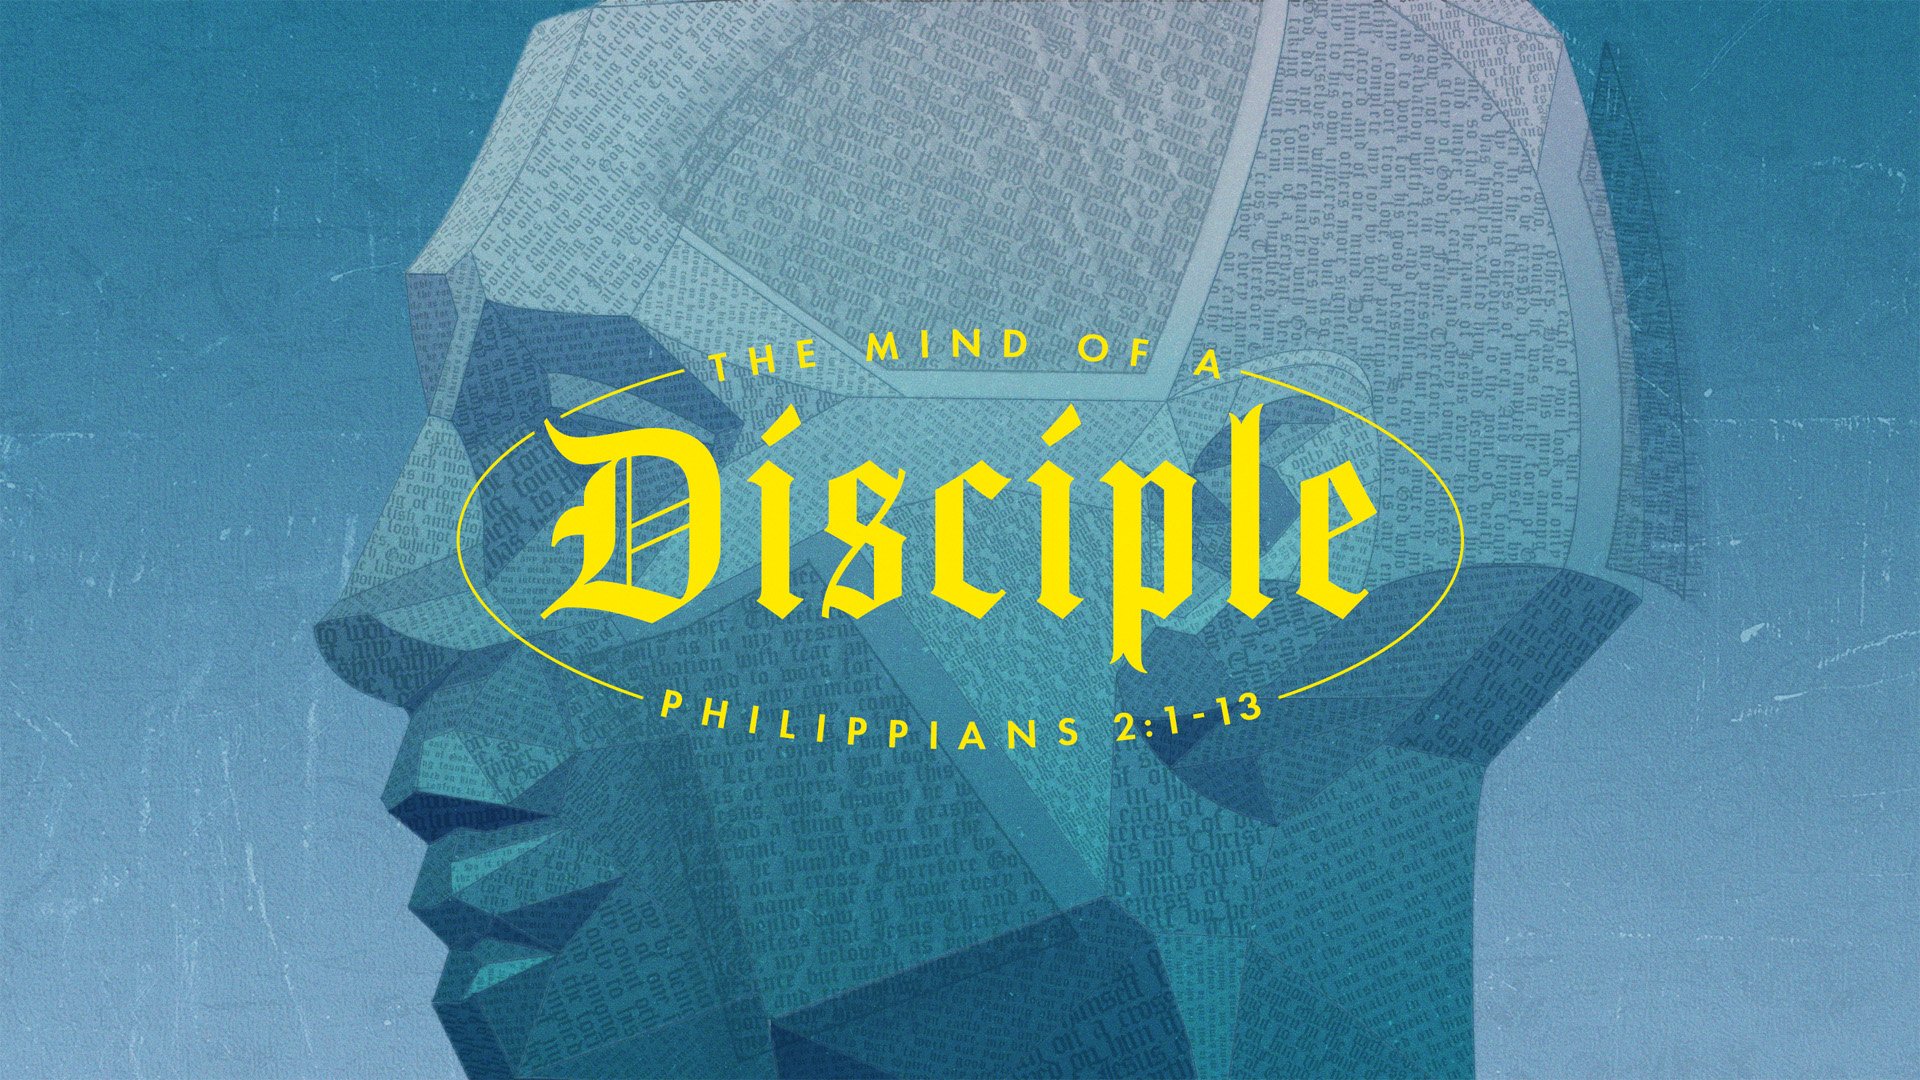 the_mind_of_a_disciple-title-1-Wide 16x9.jpg